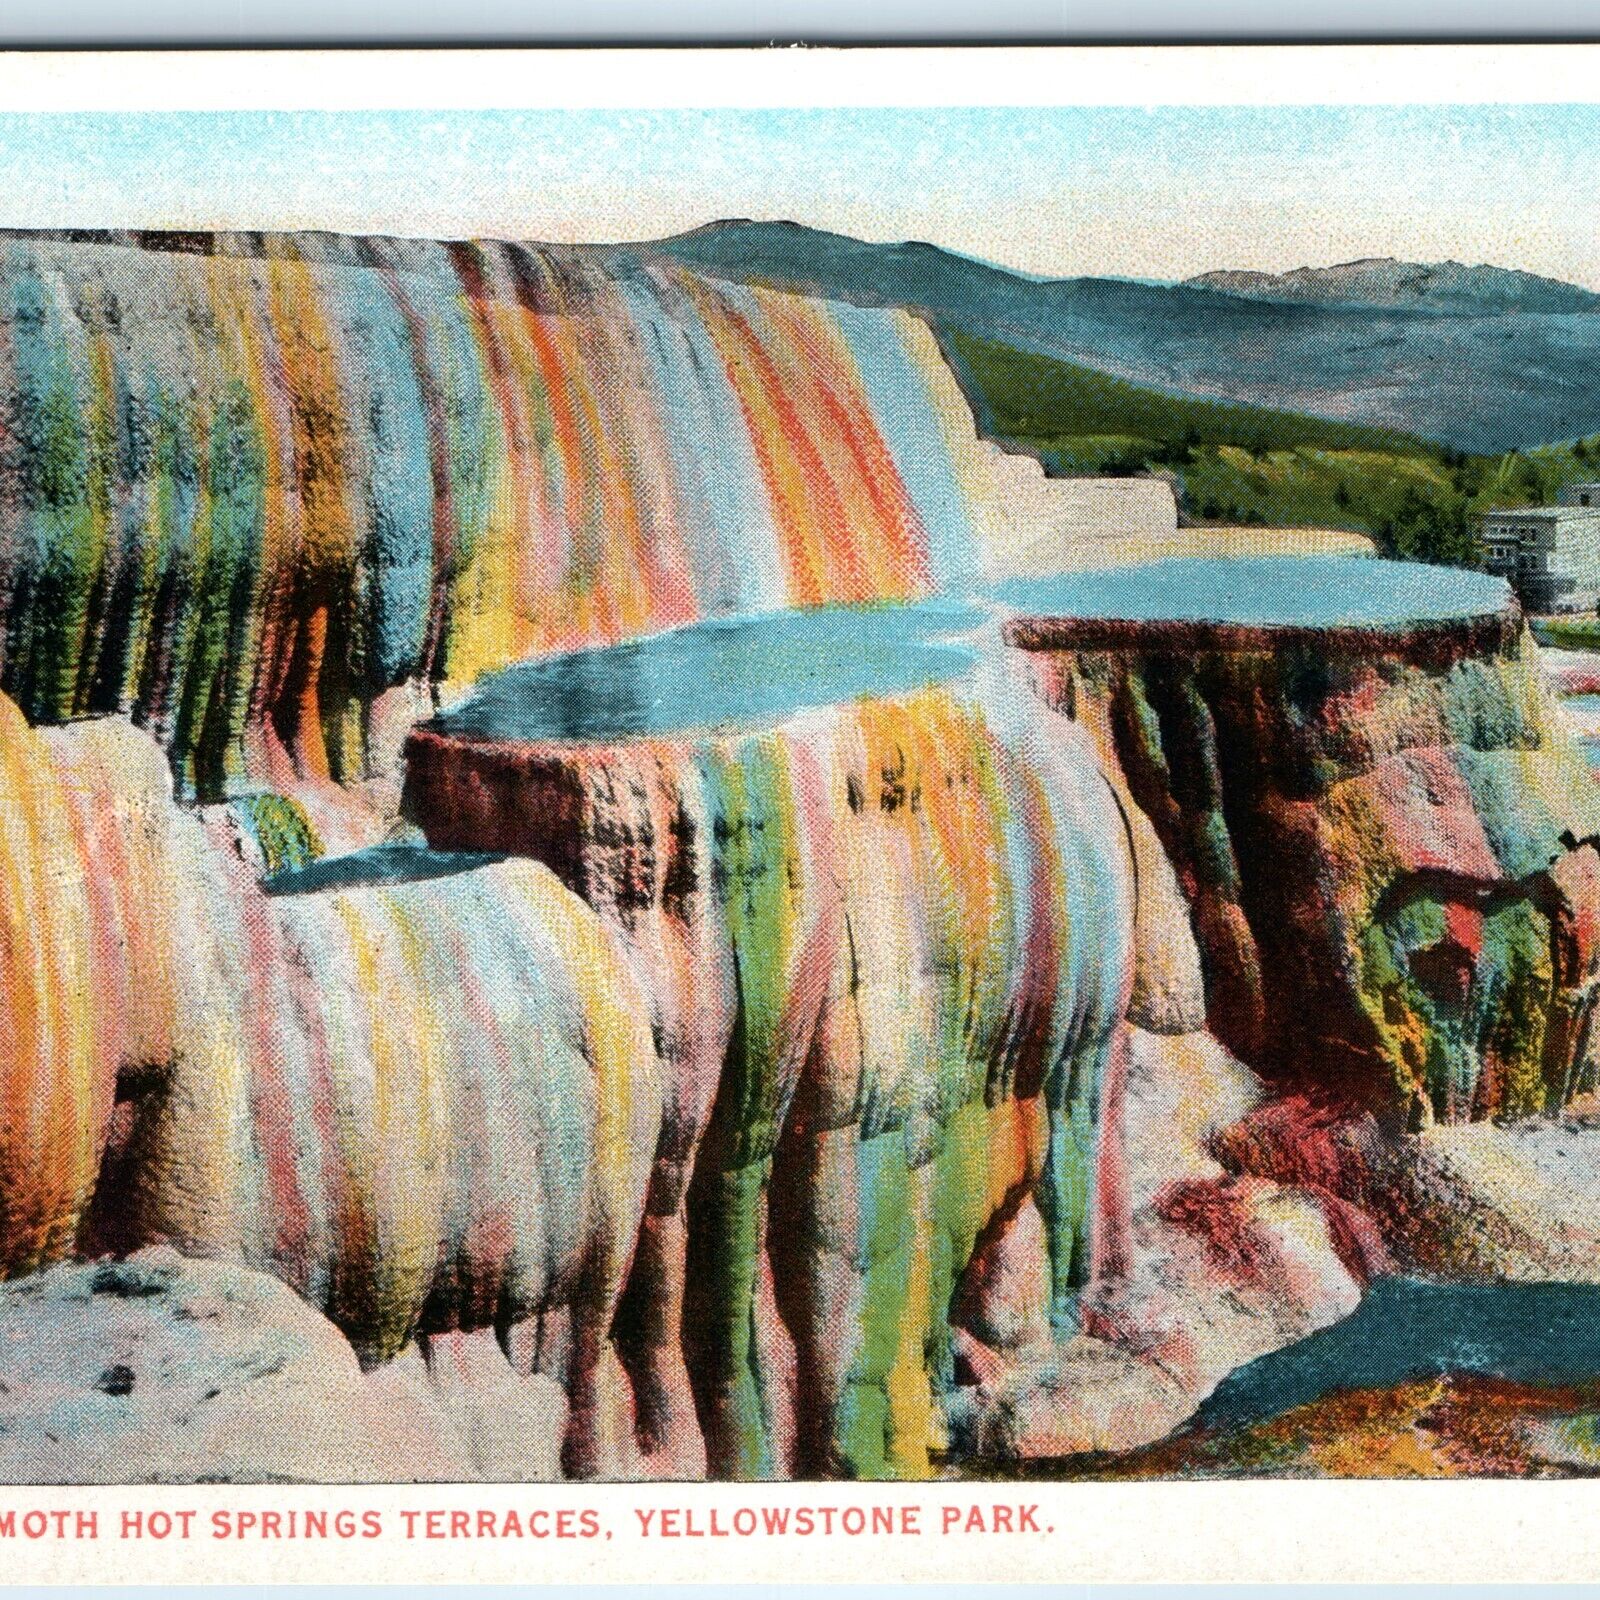 c1910s Yellowstone Park, WY Mammoth Hot Springs Terraces J.E. Haynes #11148 A226